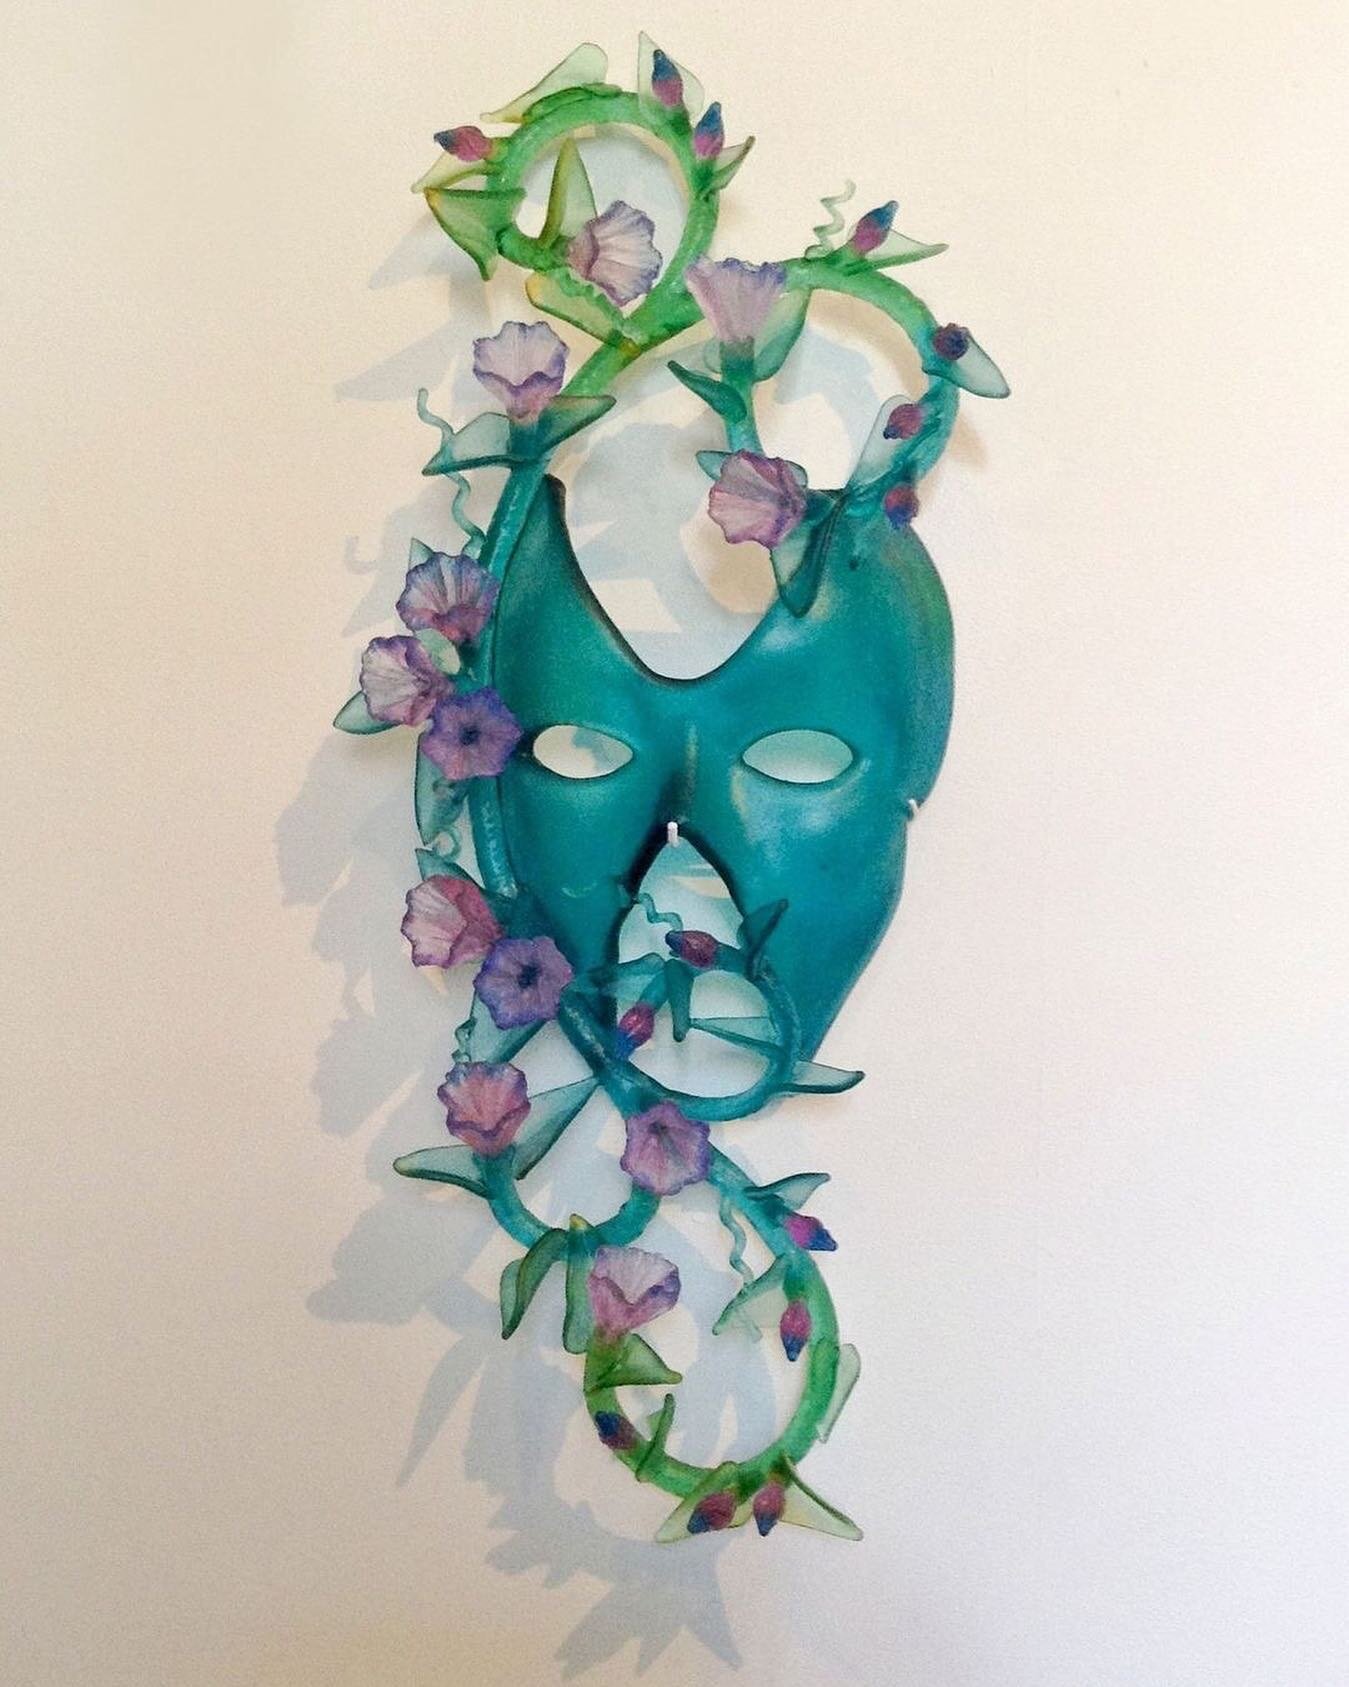 Posted @withregram &bull; @glassartinnz Mary II Mask by Evelyn Dunstan @evelyndunstan
Exhibited at Focus On Glass 22, Estuary Art Centre Orewa until Oct 30

Convolvulous, Jade &amp; emerald, hyacinth, cobalt flowers. Lost wax cast, 45% lead crystal g